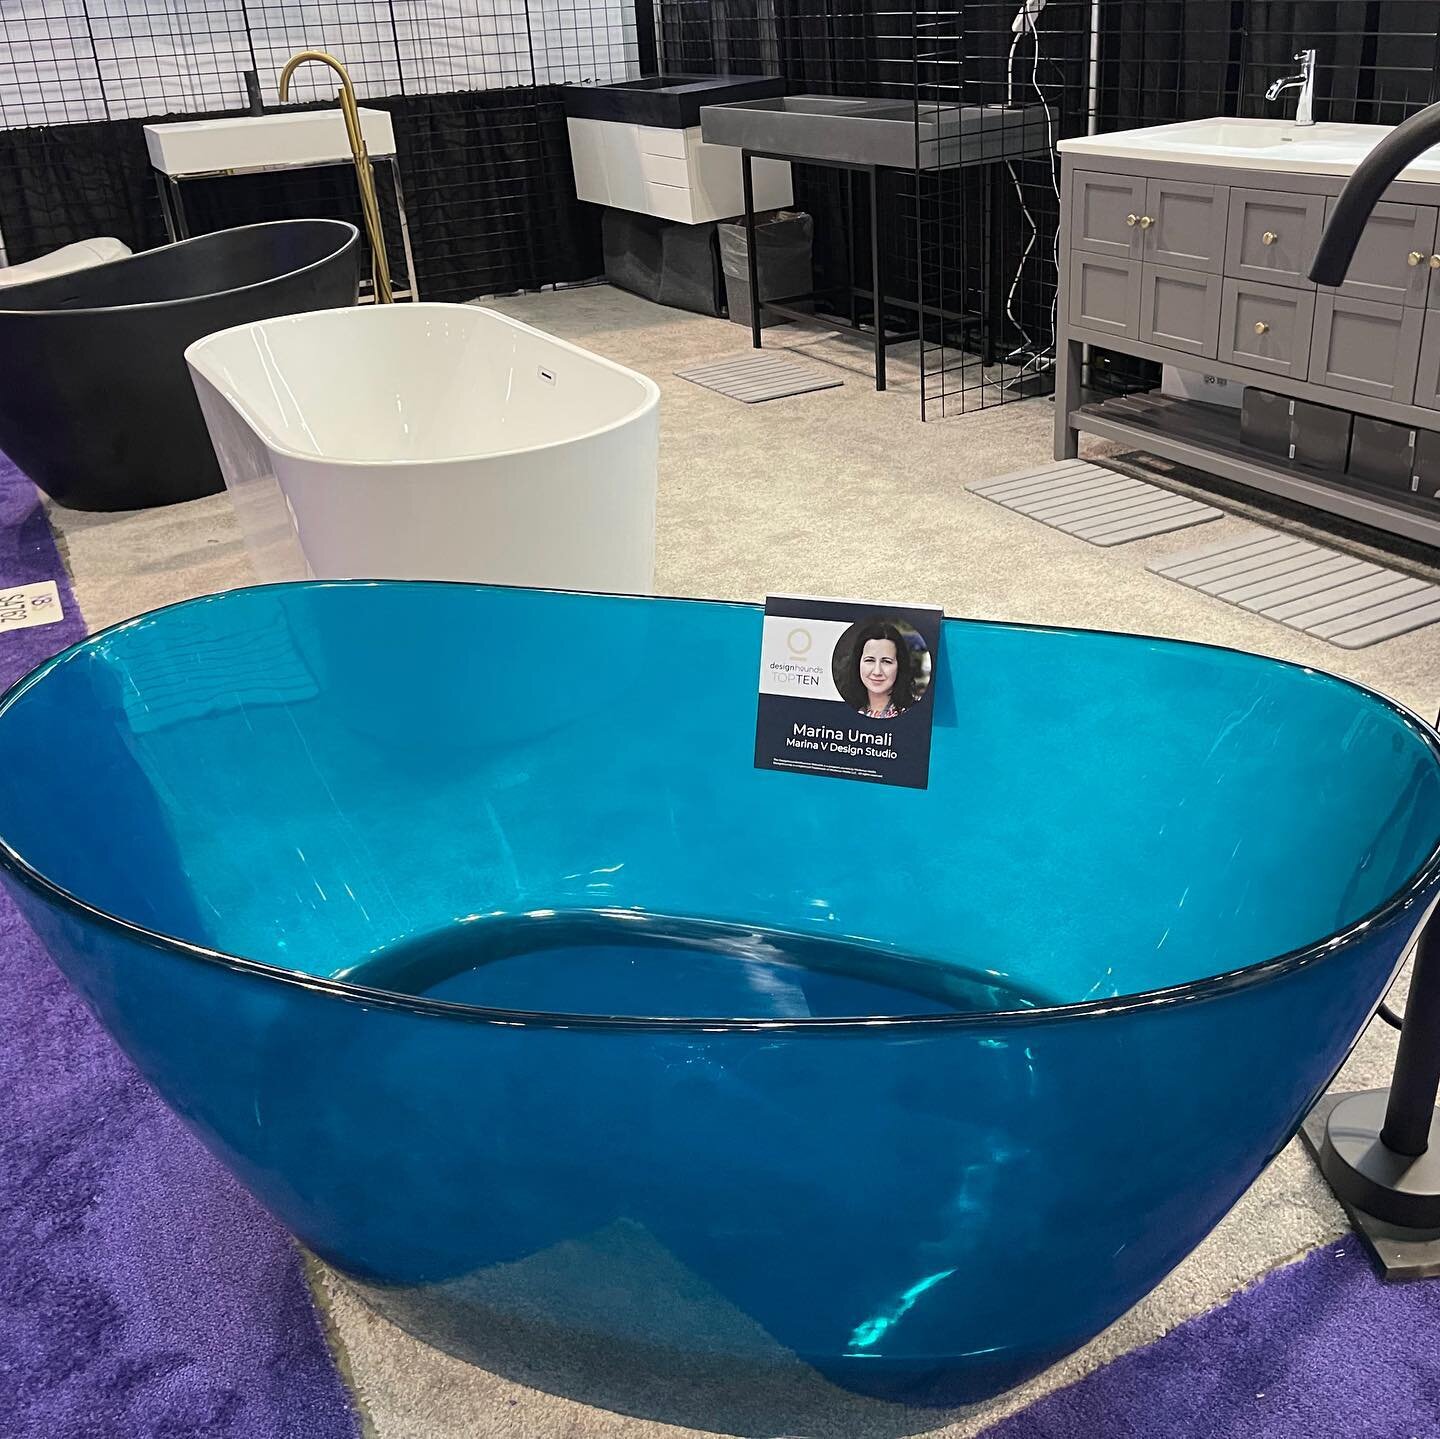 My Top 10 revealed! Feels like @kbis_official was a long time ago but it&rsquo;s been a little over a month since us @designhounds were assigned to find our Top Ten products. I loved the search for cool 😎 and innovative kitchen and bath products. Si